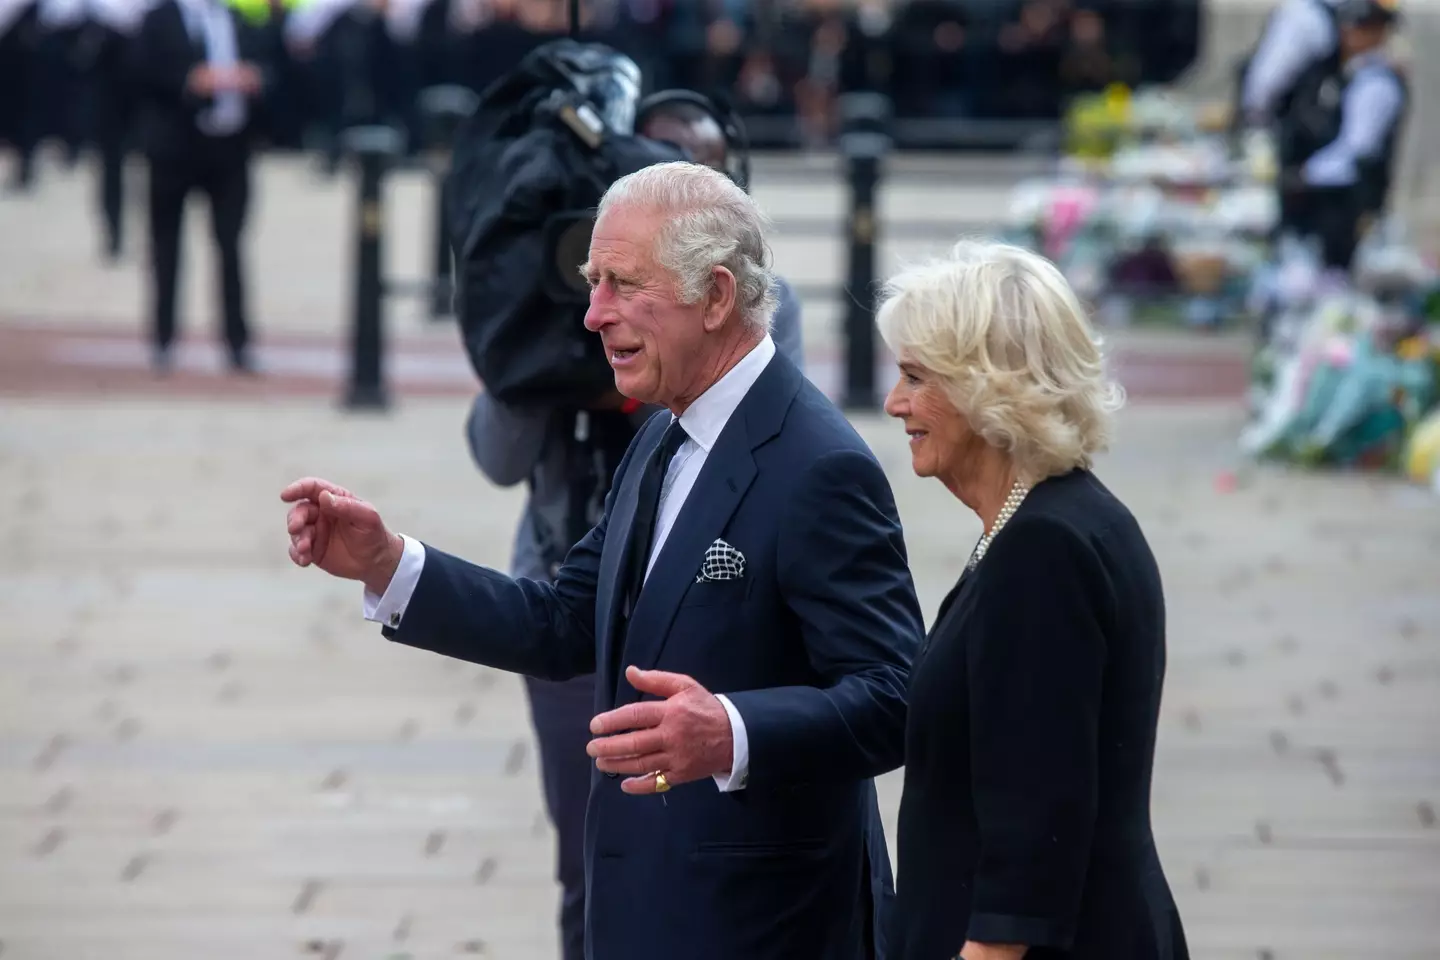 King Charles III and Queen Consort Camilla were in Wales.